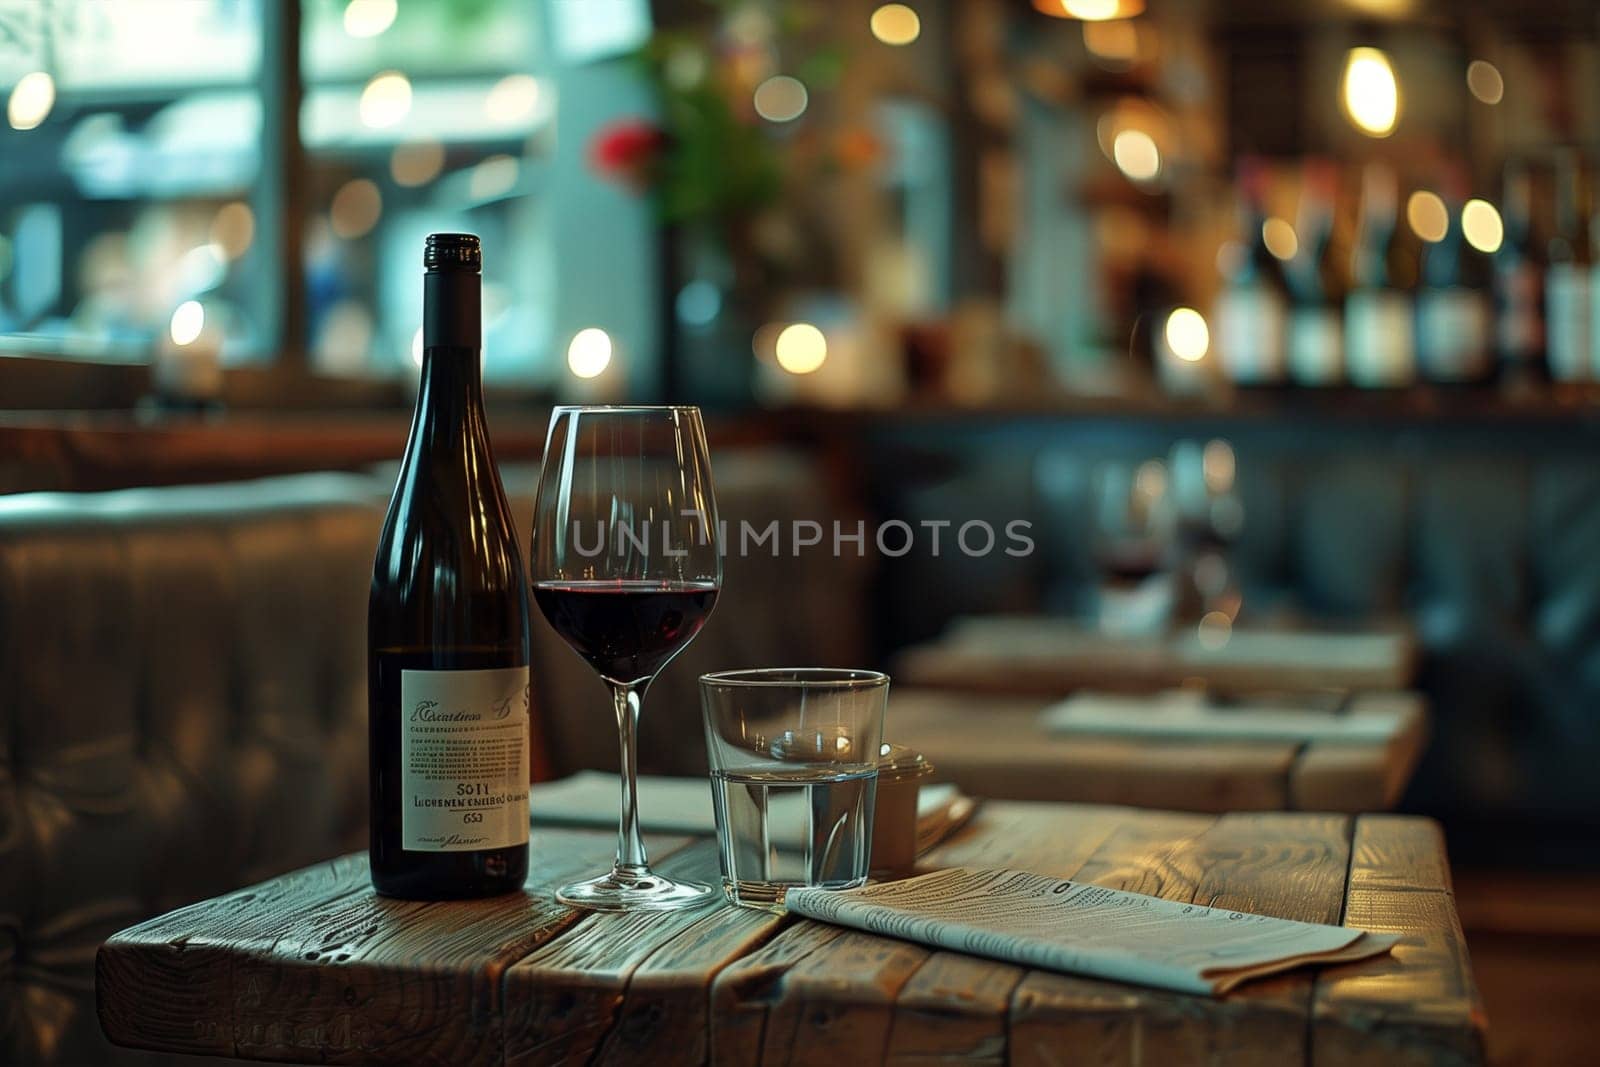 A bottle of red wine standing upright on a wooden table in a busy restaurant setting.